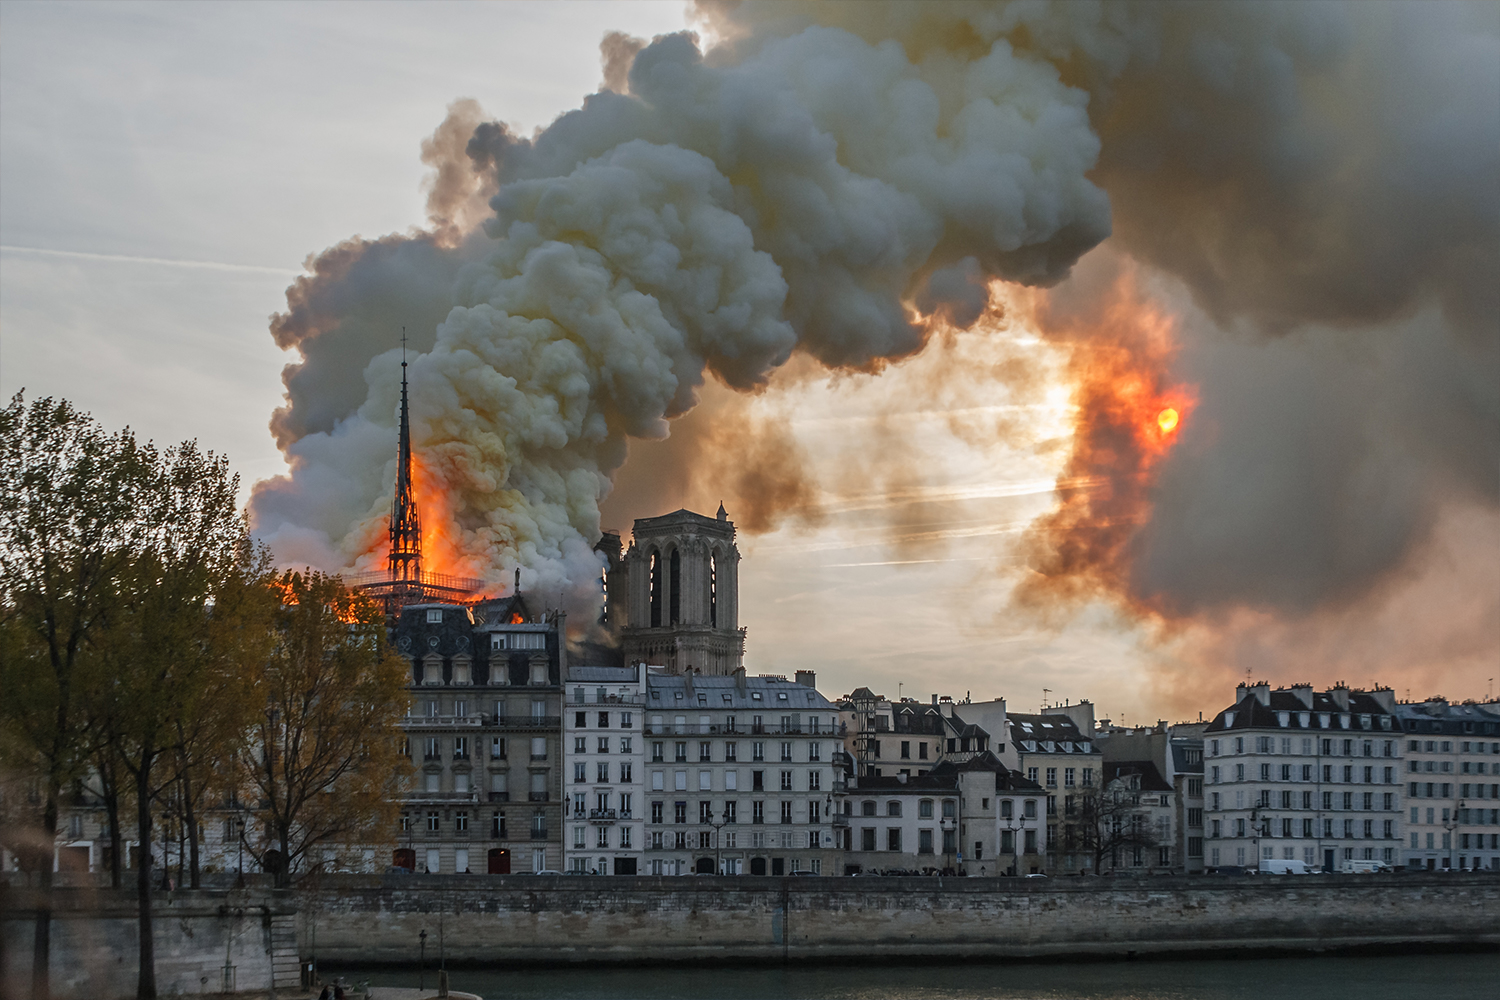 The fire at Notre Dame on April 15